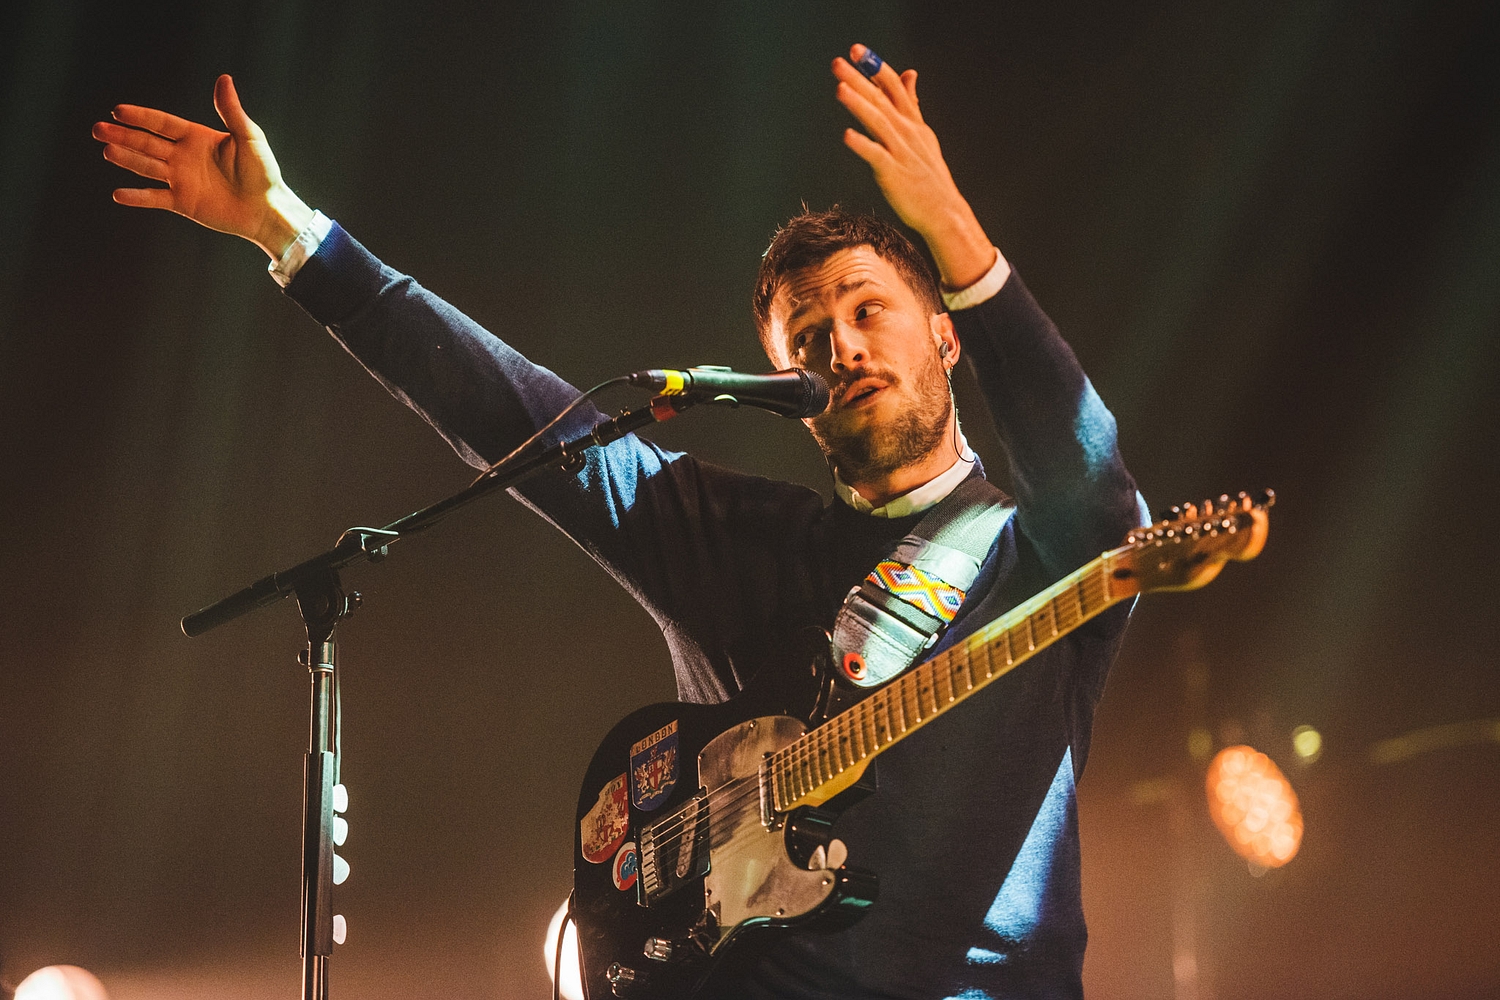 The Maccabees, The National, New Order to headline Latitude 2016